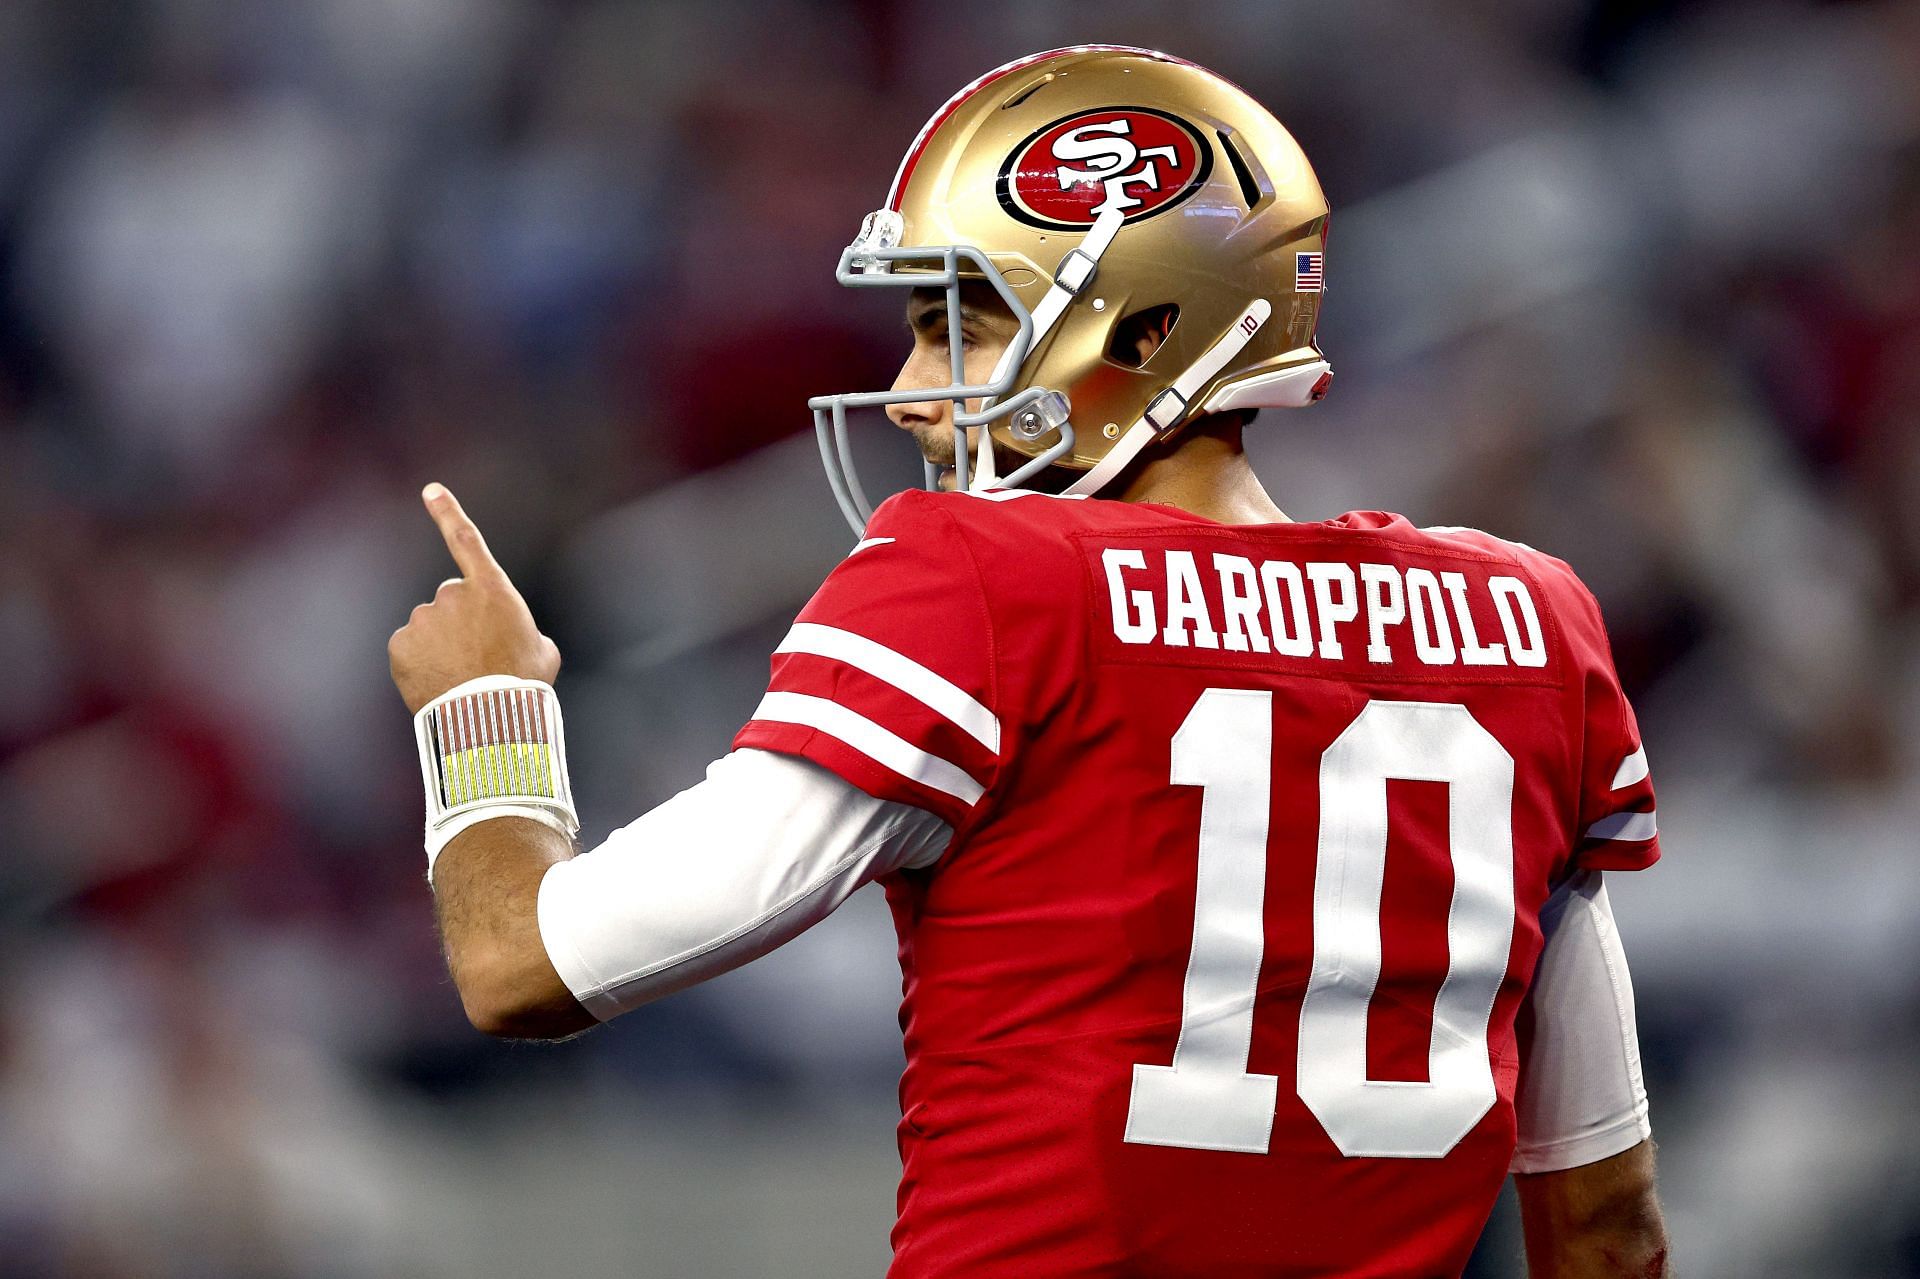 Garoppolo will need to be traded by the 49ers